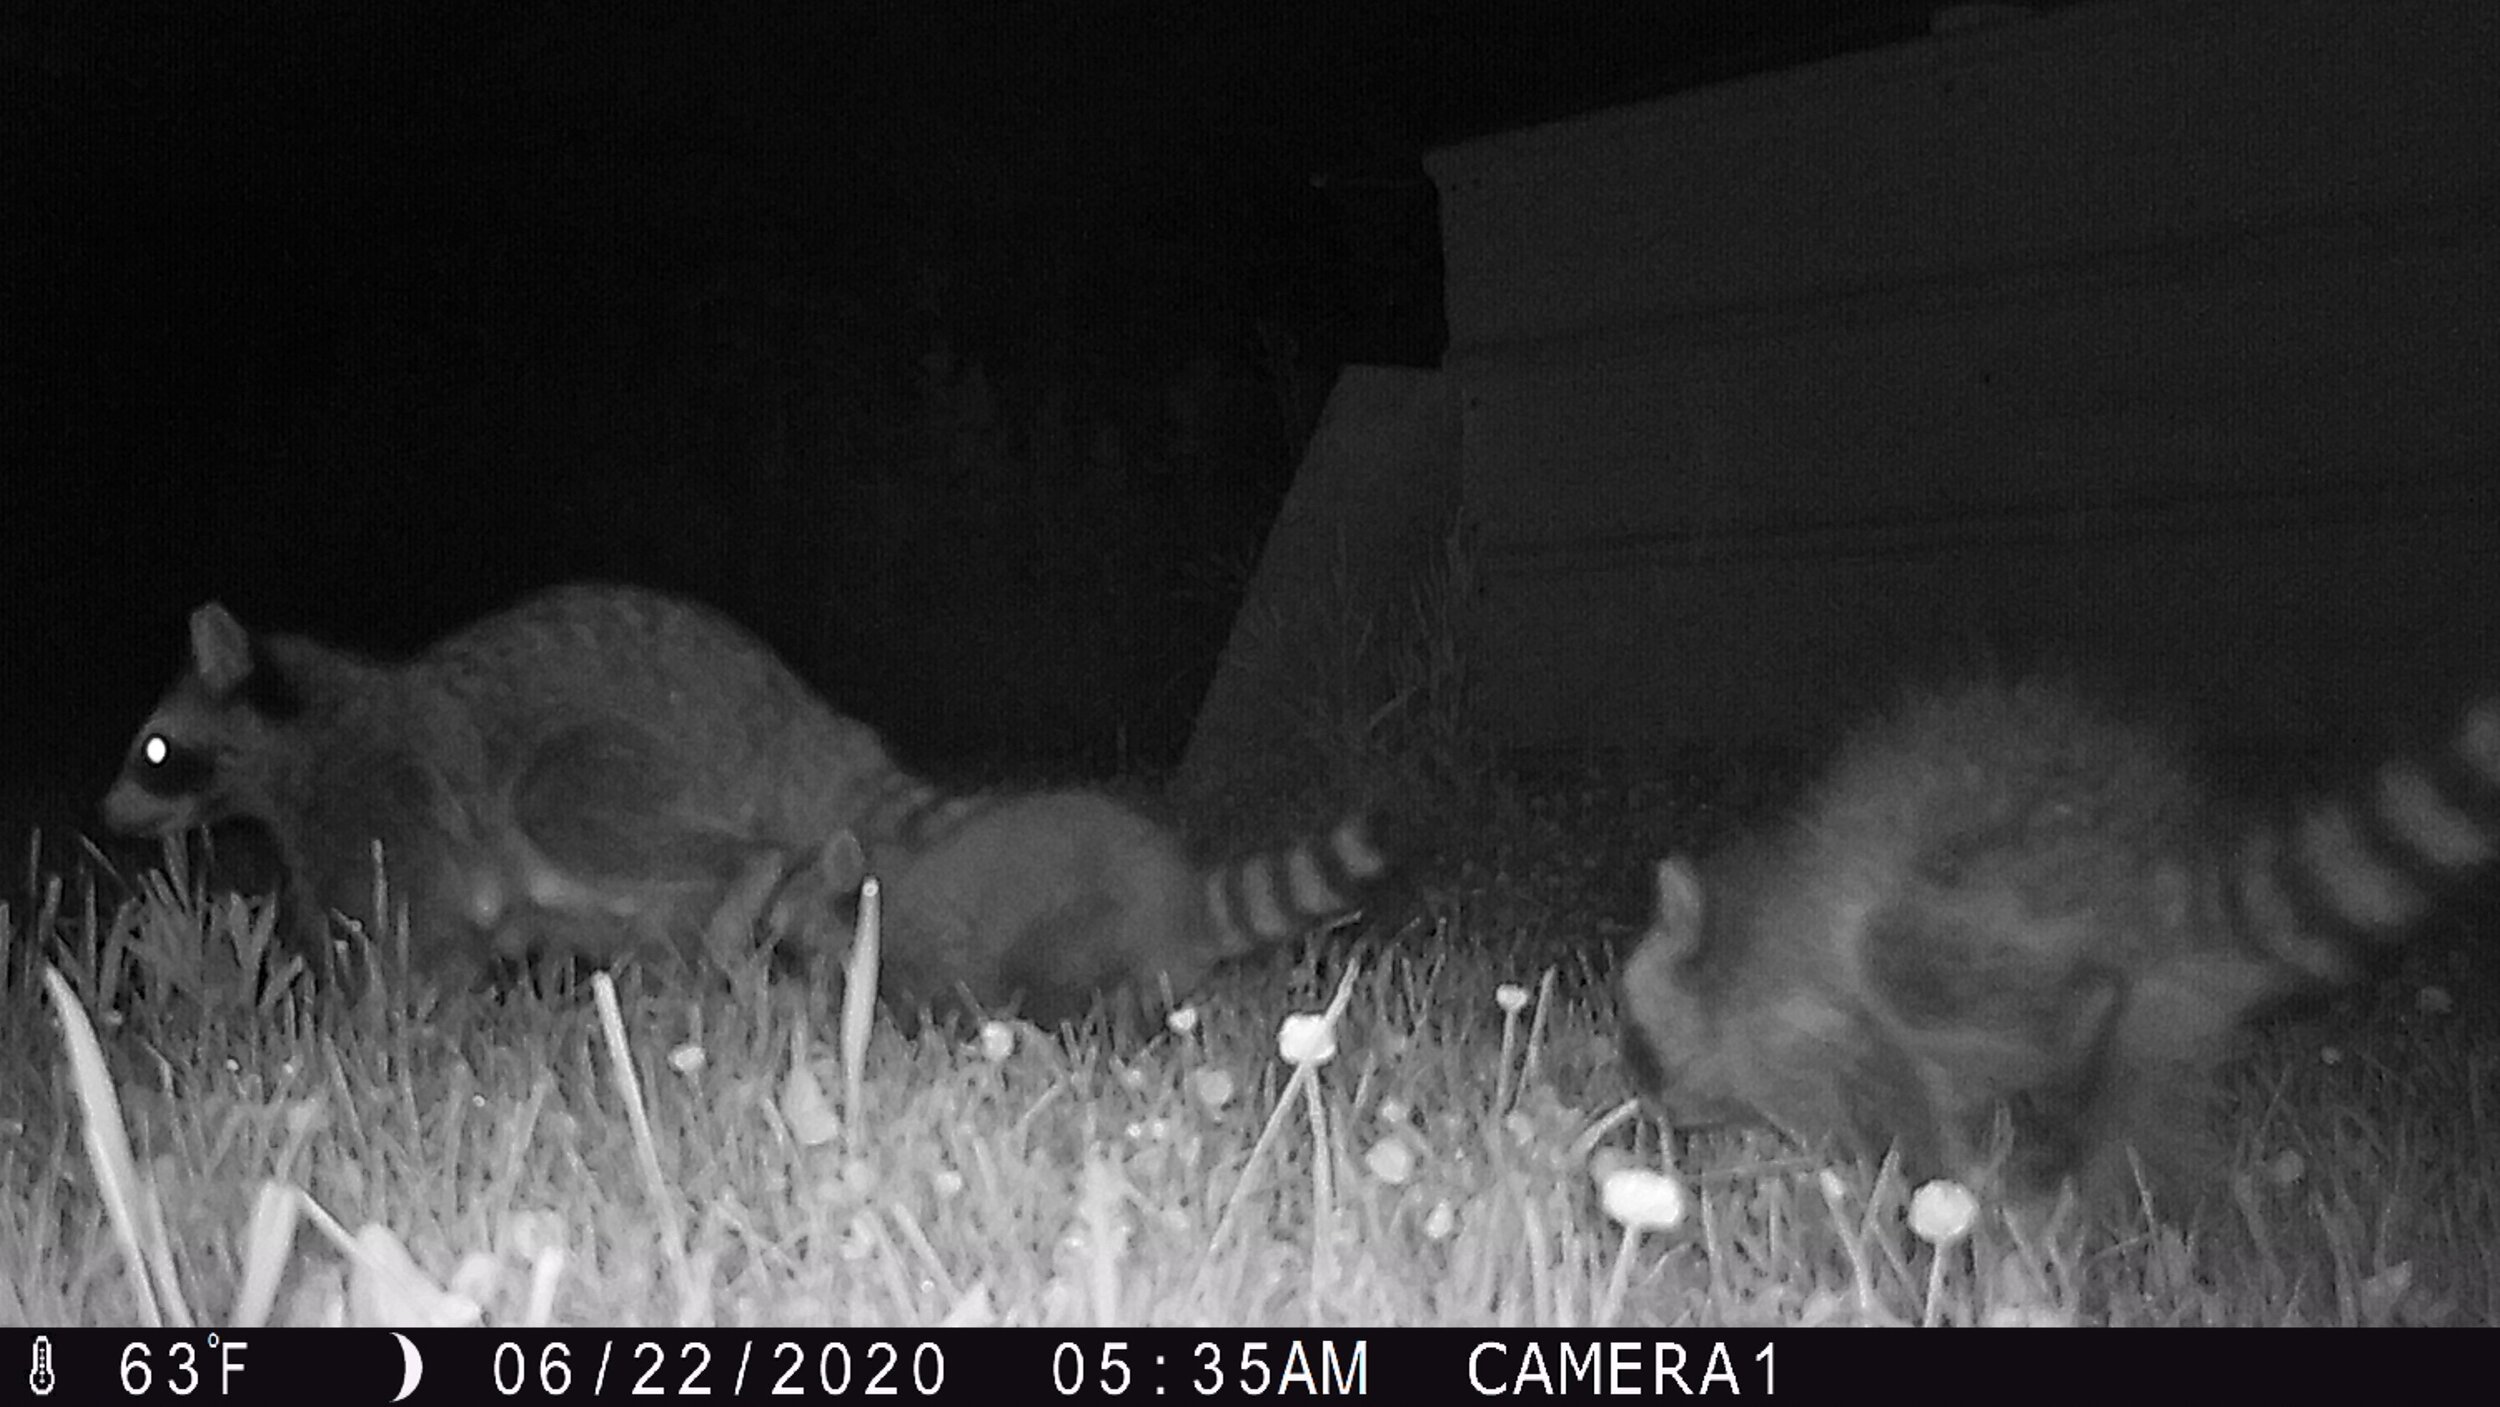 Uh oh, two generations of raccoons!